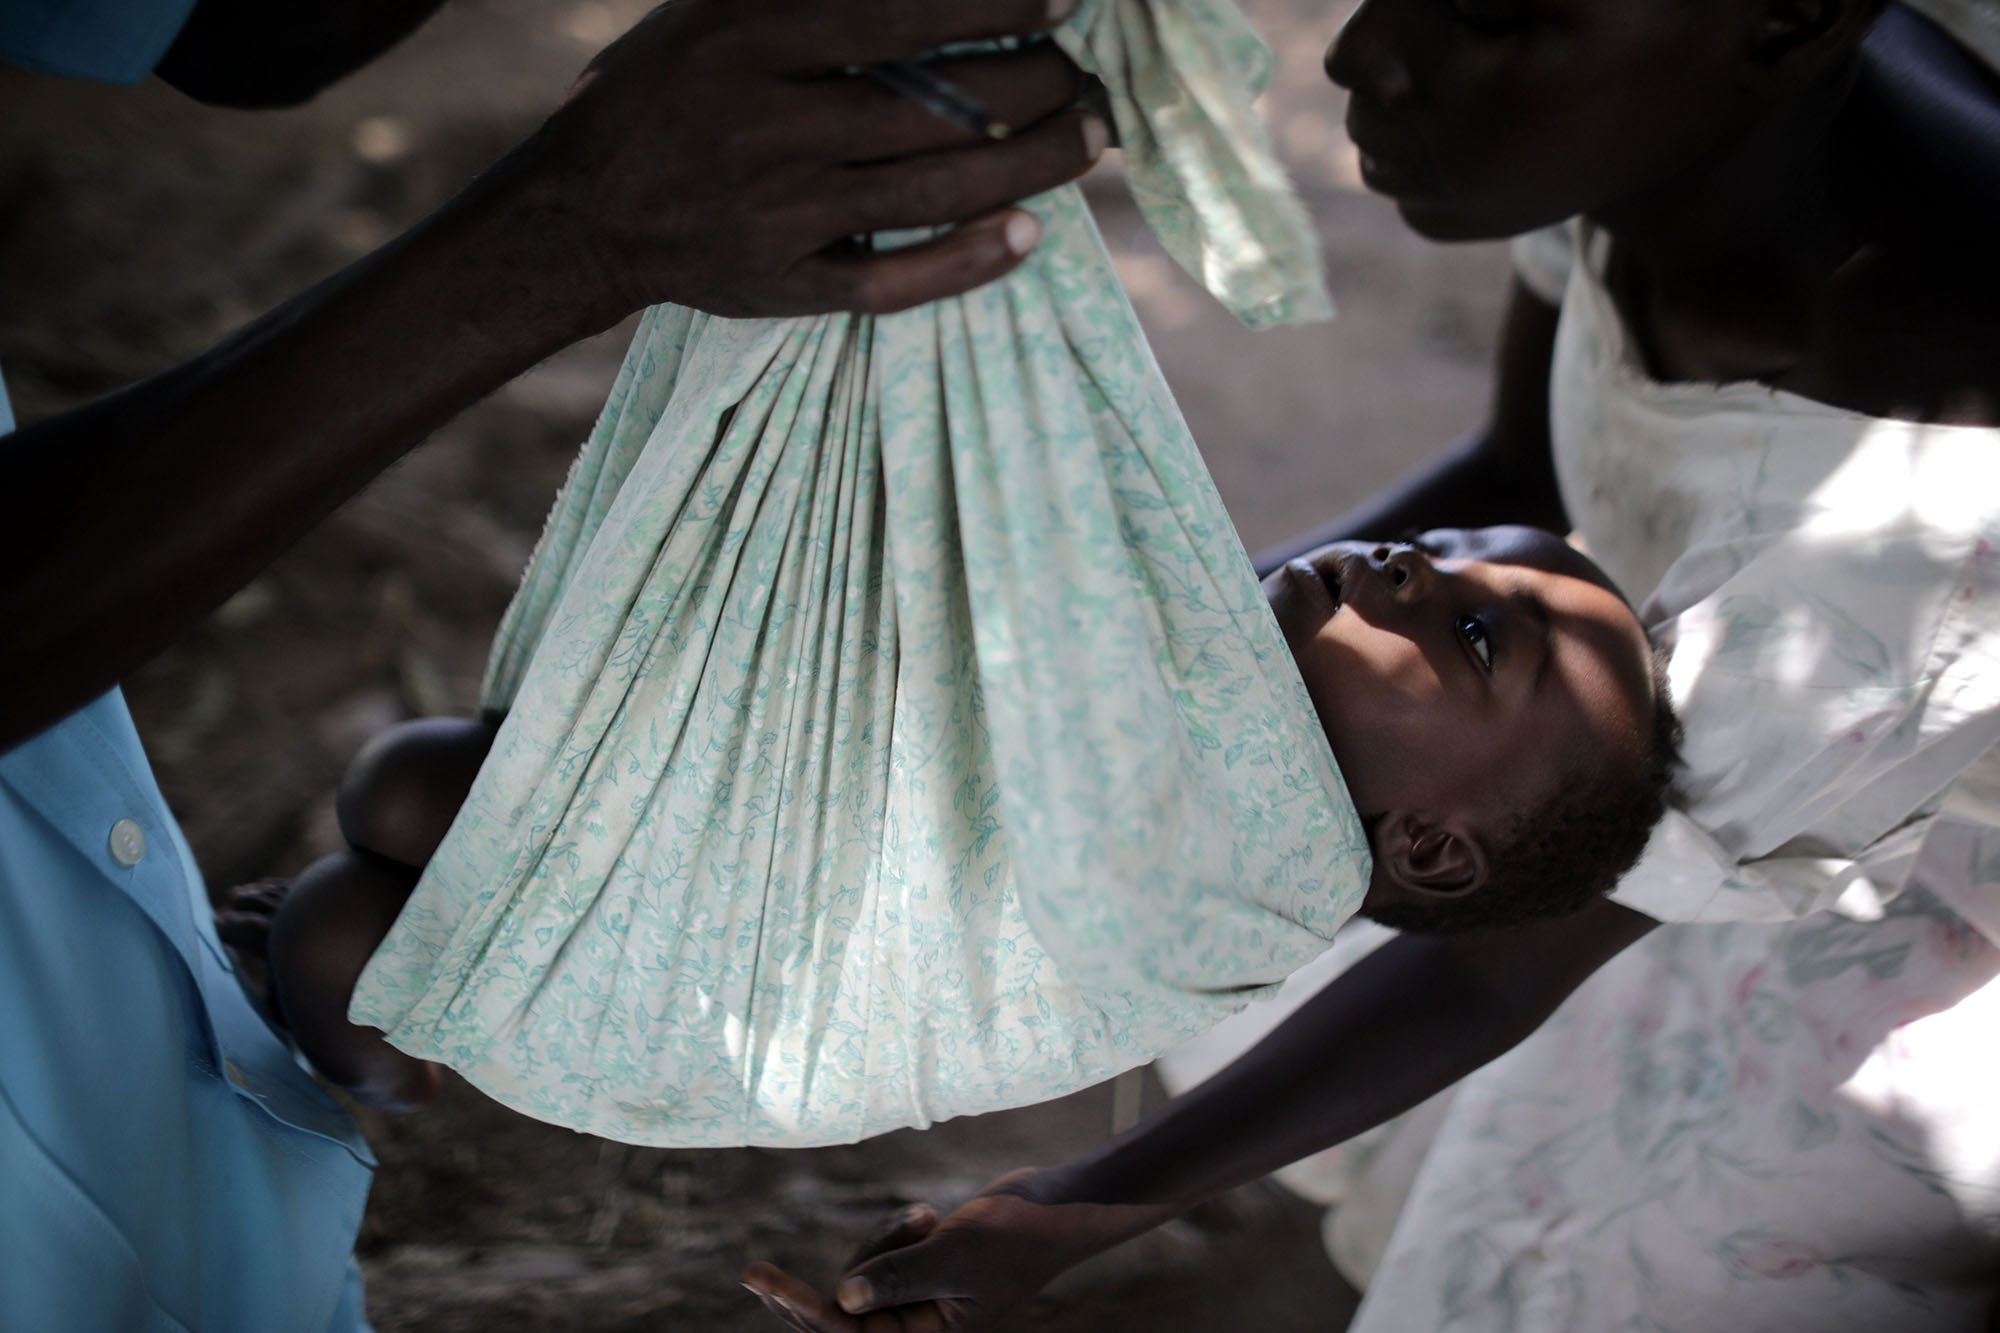  Women began to gather under the shade of a large tree in TA Nsamala, with baby’s on their backs. The program implemented by the government and supported by UNICEF is part of the “improvement of nutritional and health situation for children under 5, 